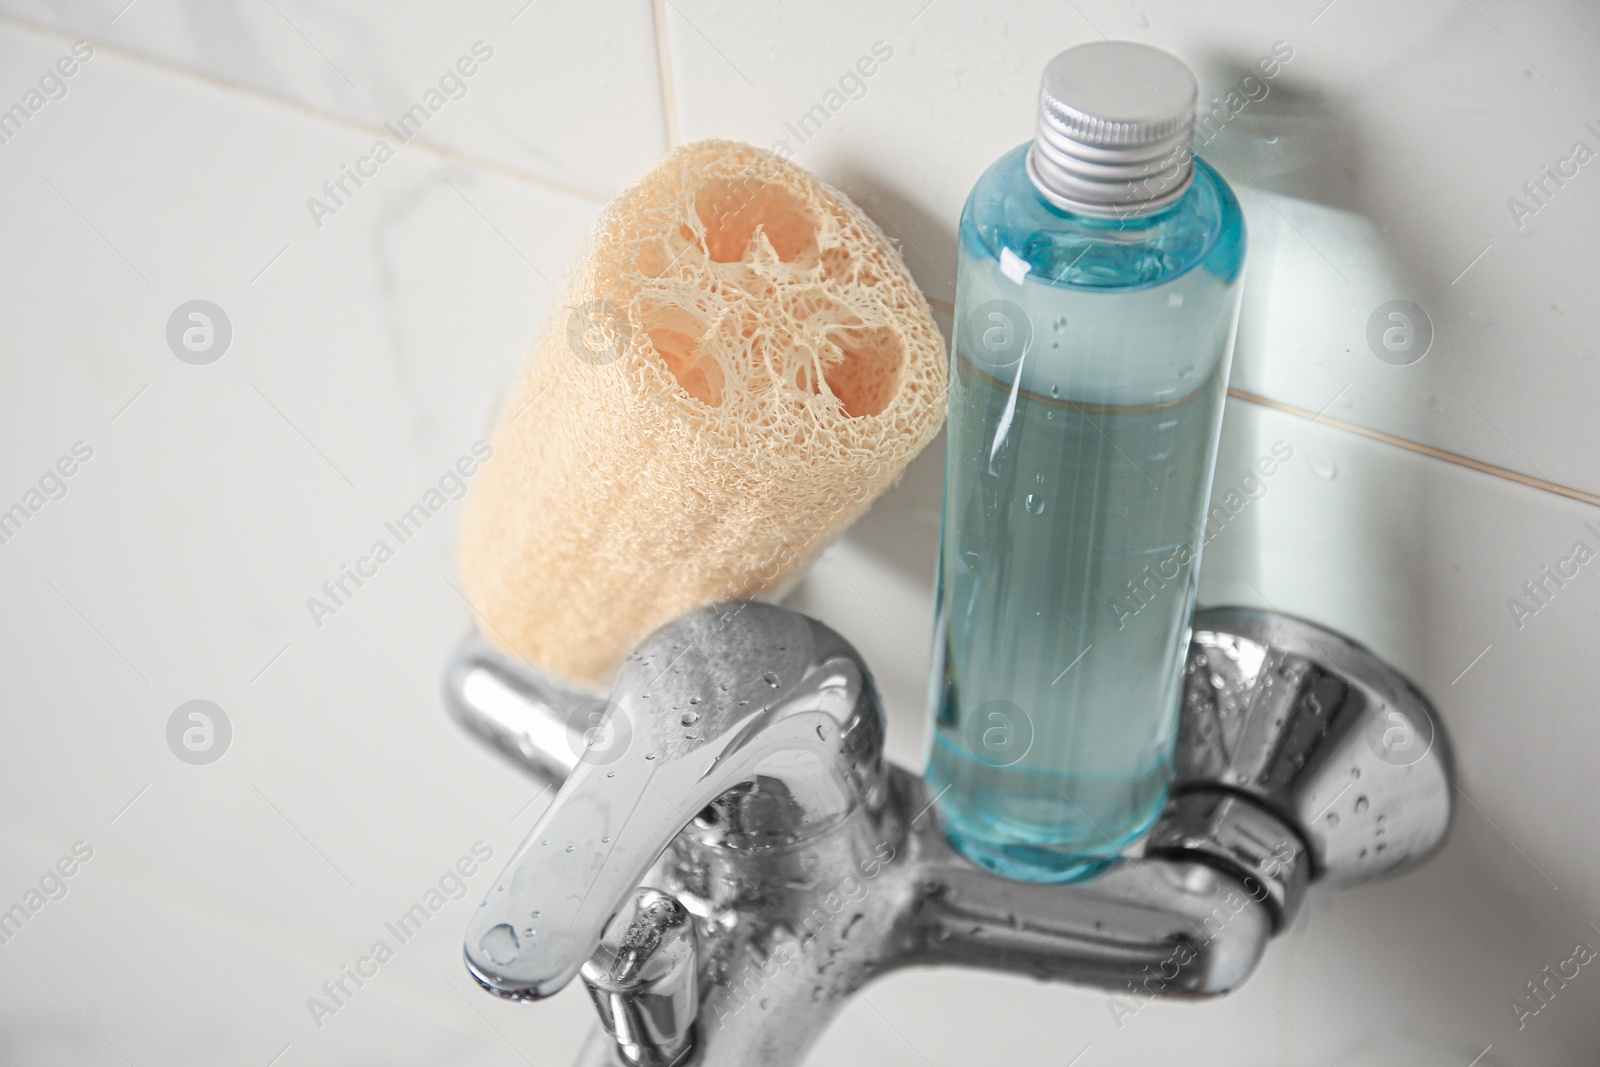 Photo of Natural loofah sponge and shower gel bottle on faucet in bathroom, closeup